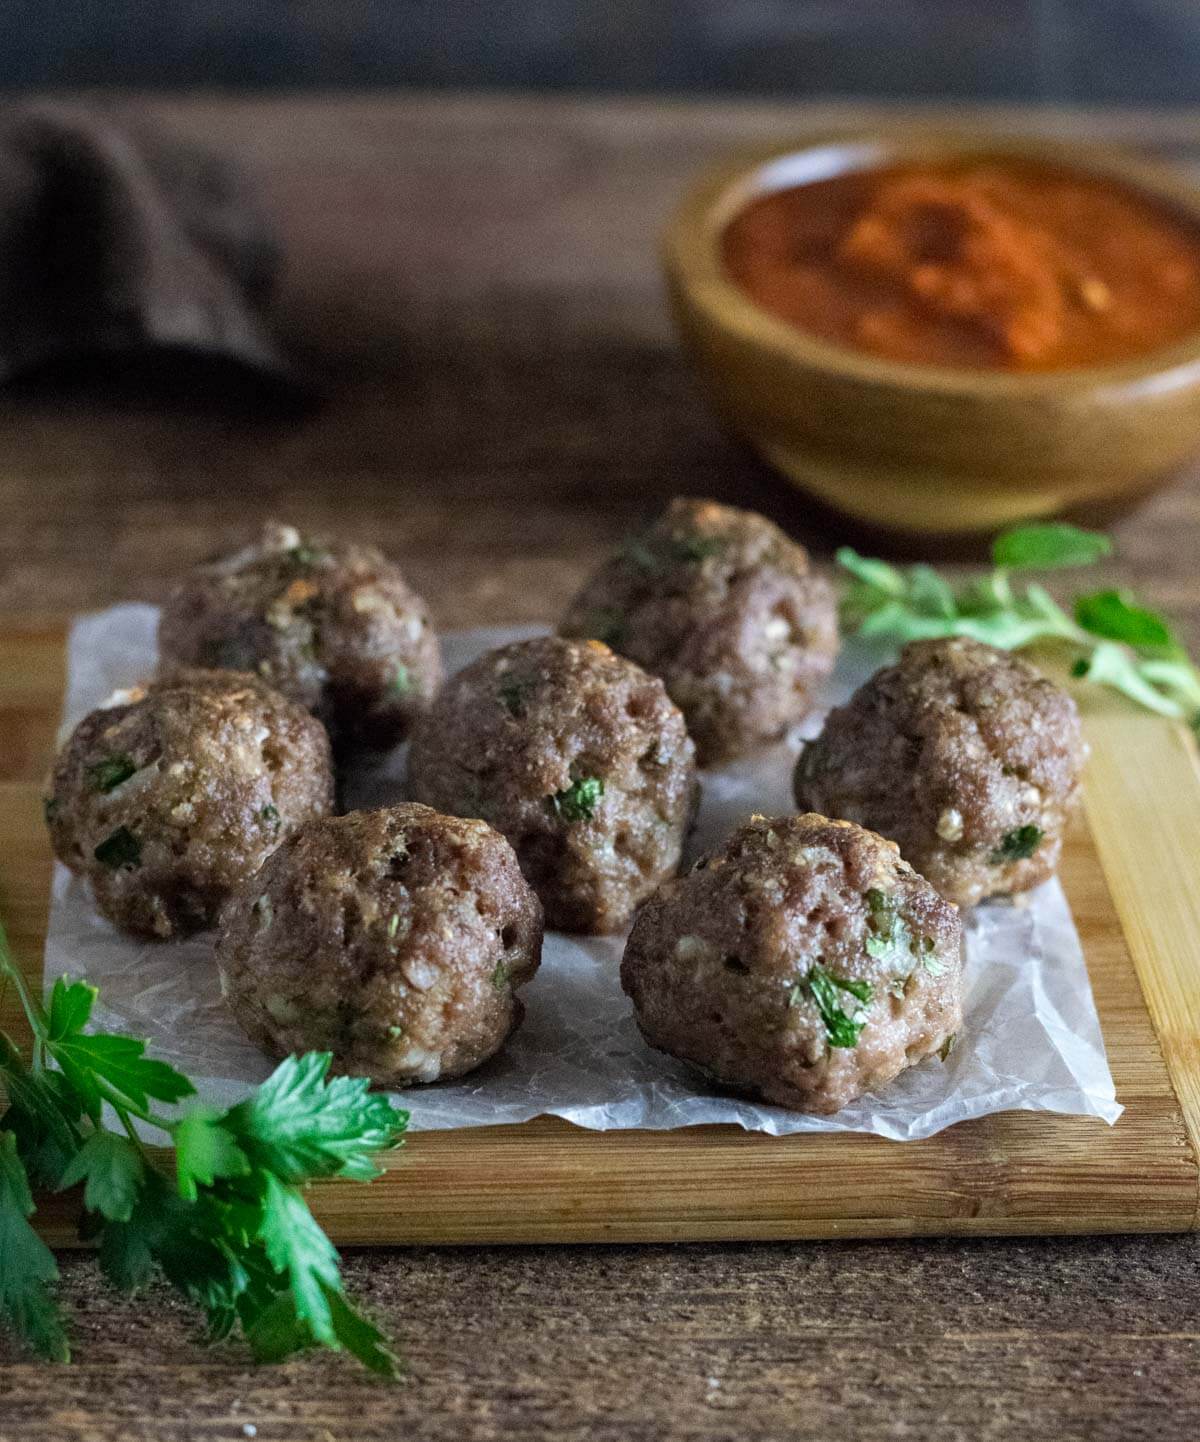 Eggless meatballs served with tomato sauce.